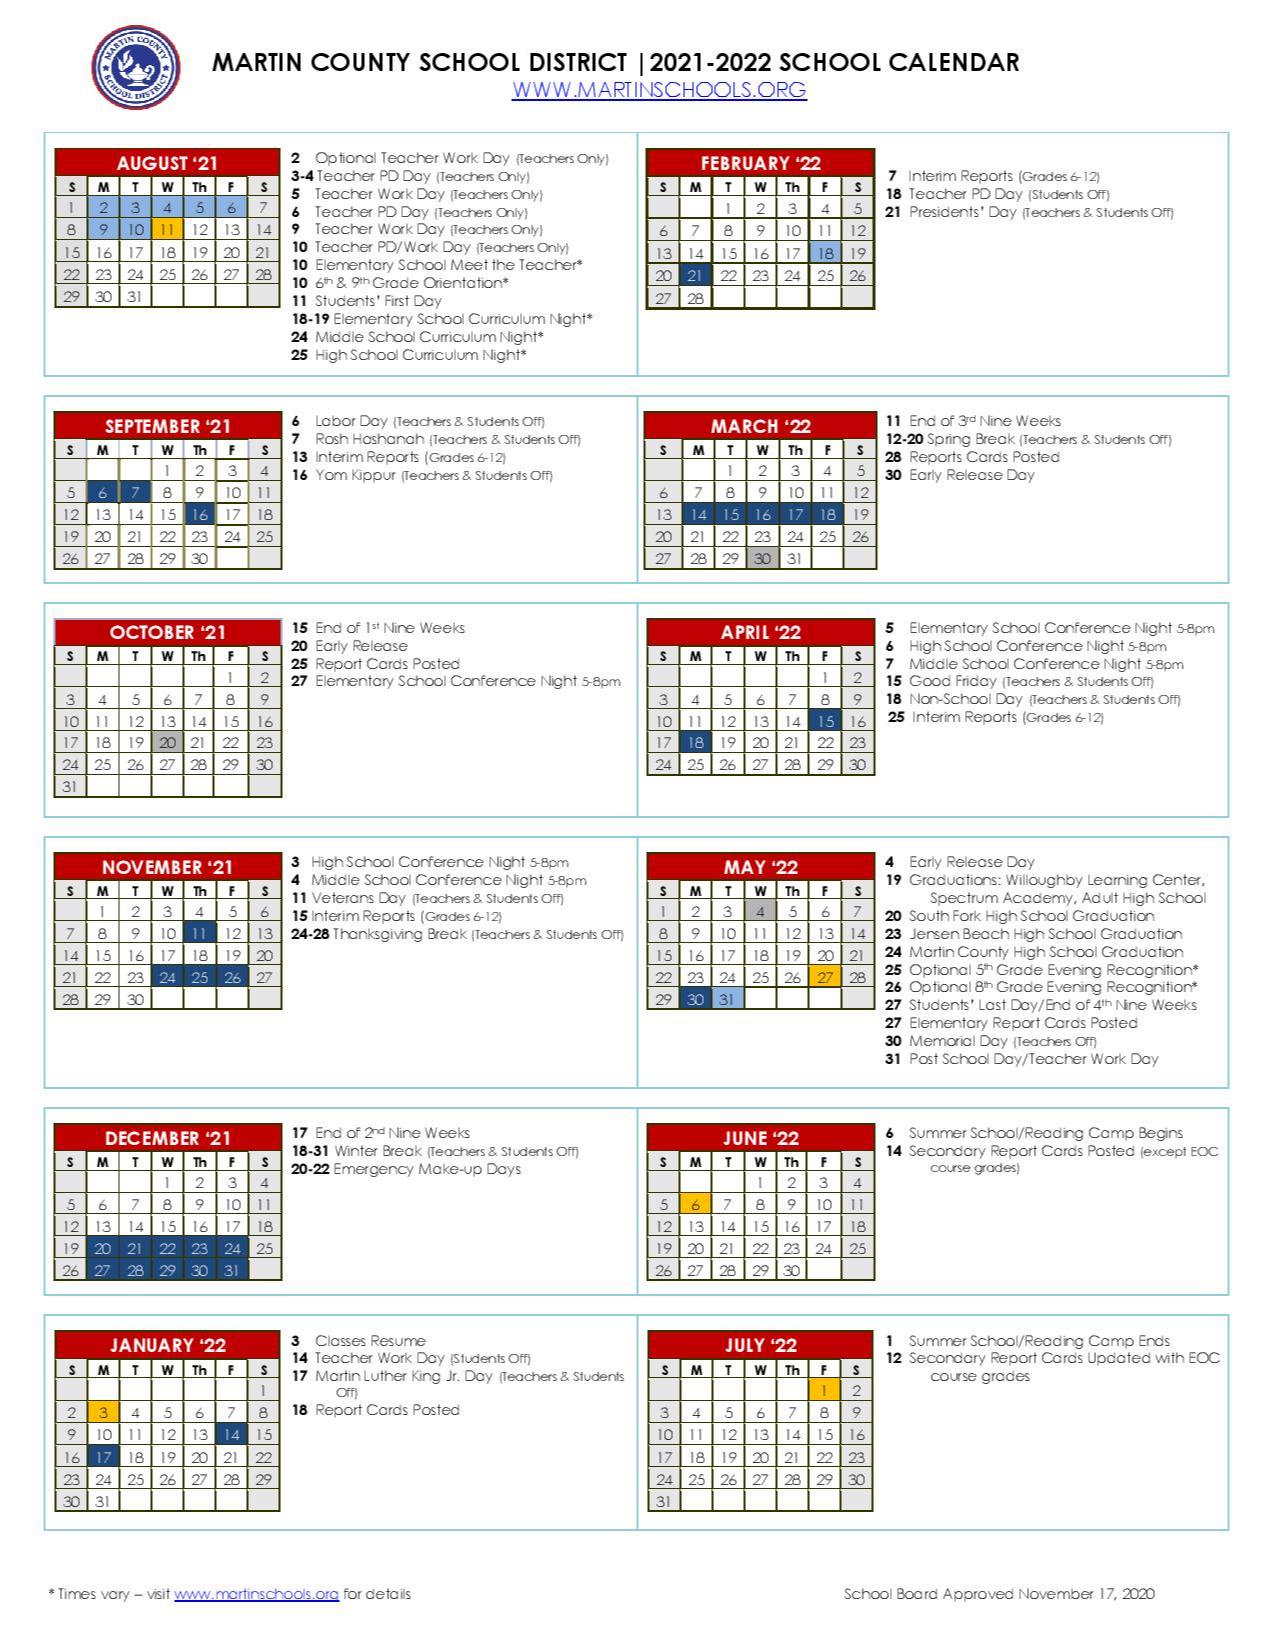 gallup-mckinley-county-schools-calendar-2021-and-2022-publicholidays-us-from-county-calendar